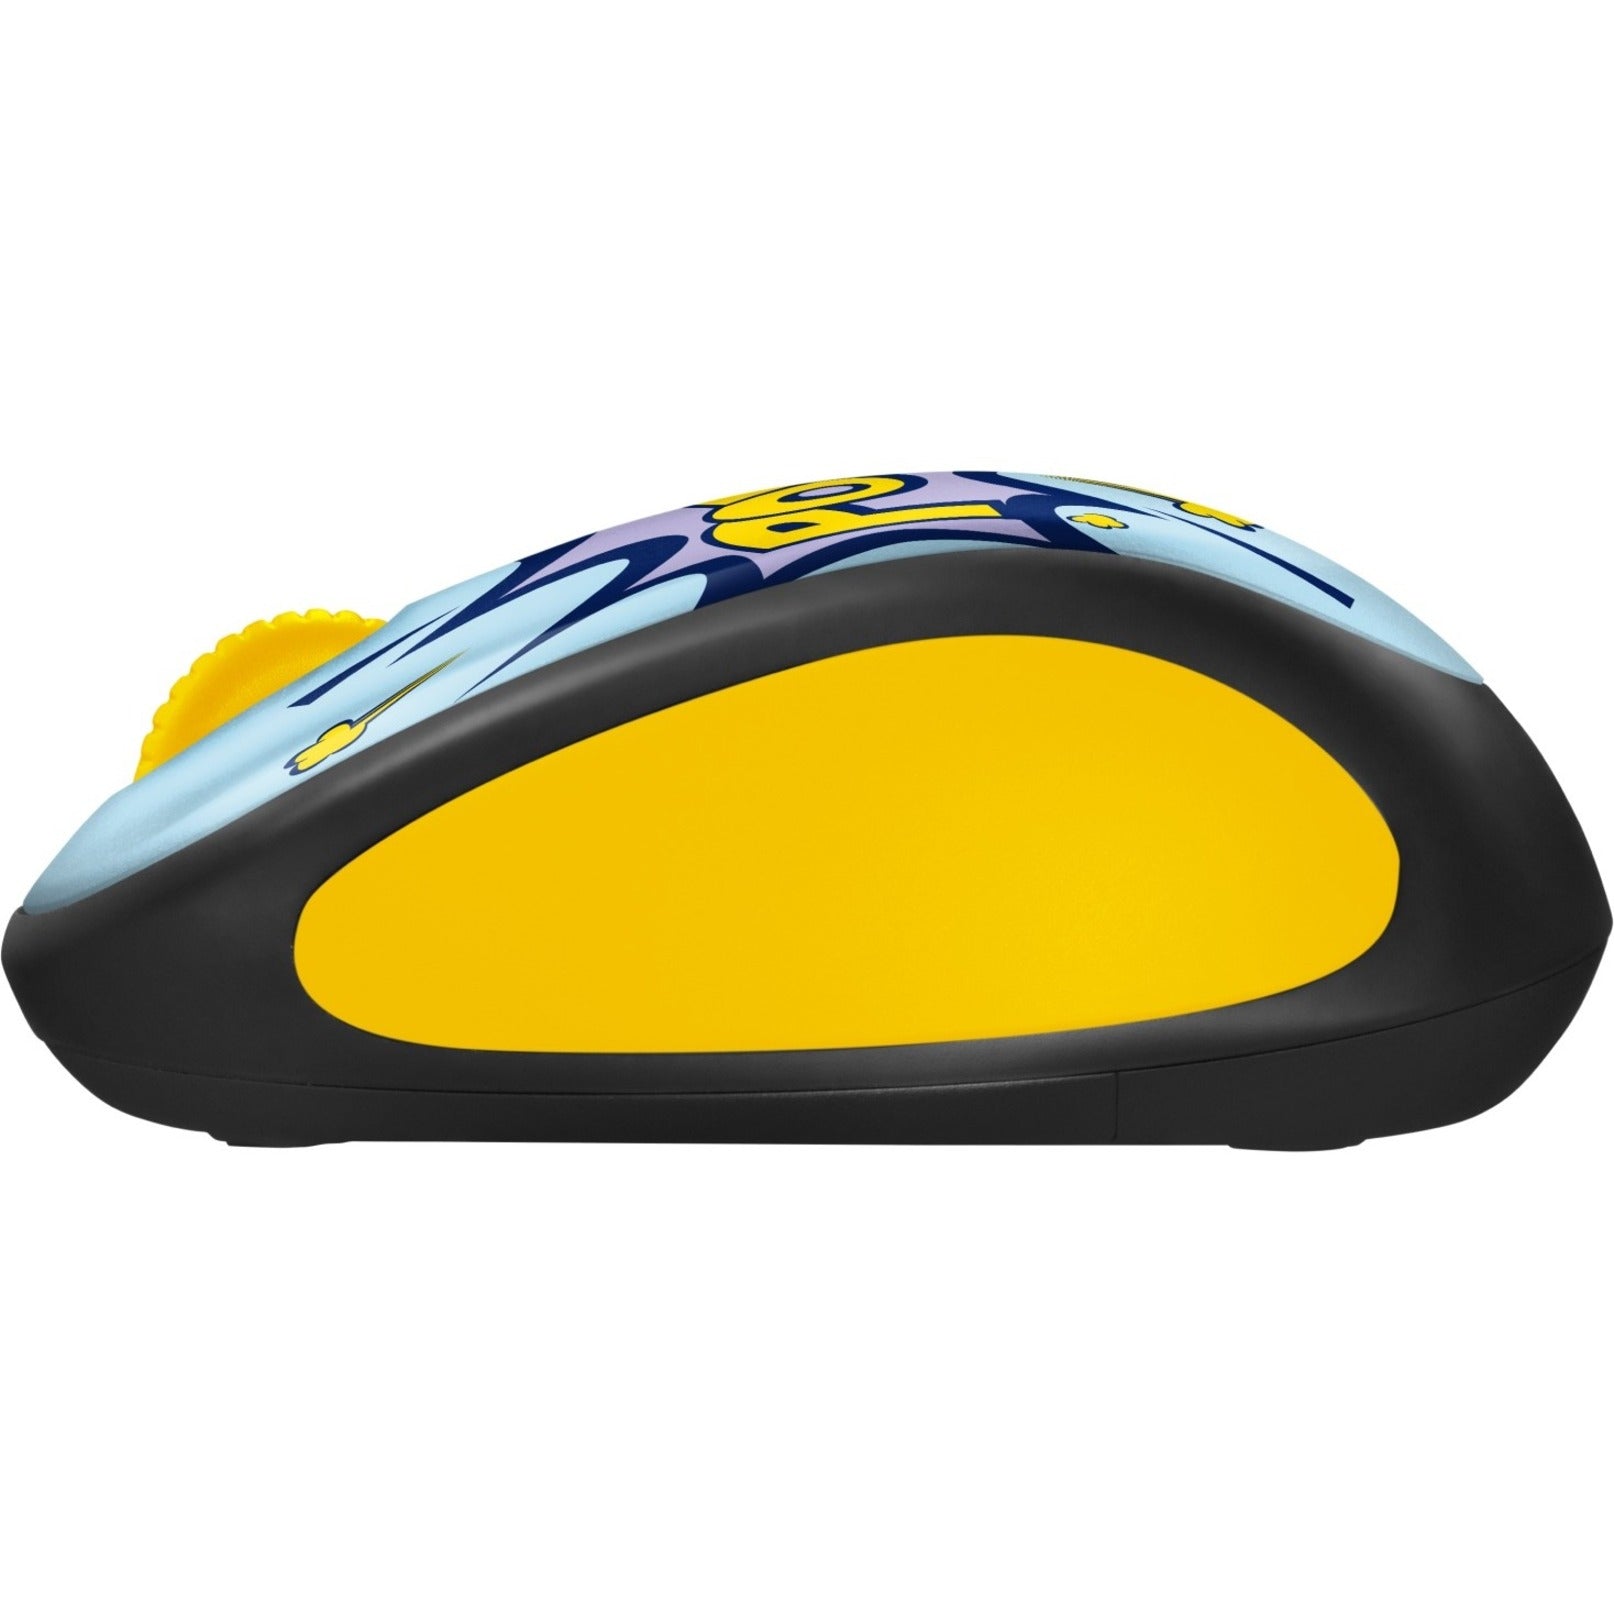 Logitech 910-006122 Design Collection Wireless Mouse - POW [Discontinued] [Discontinued]